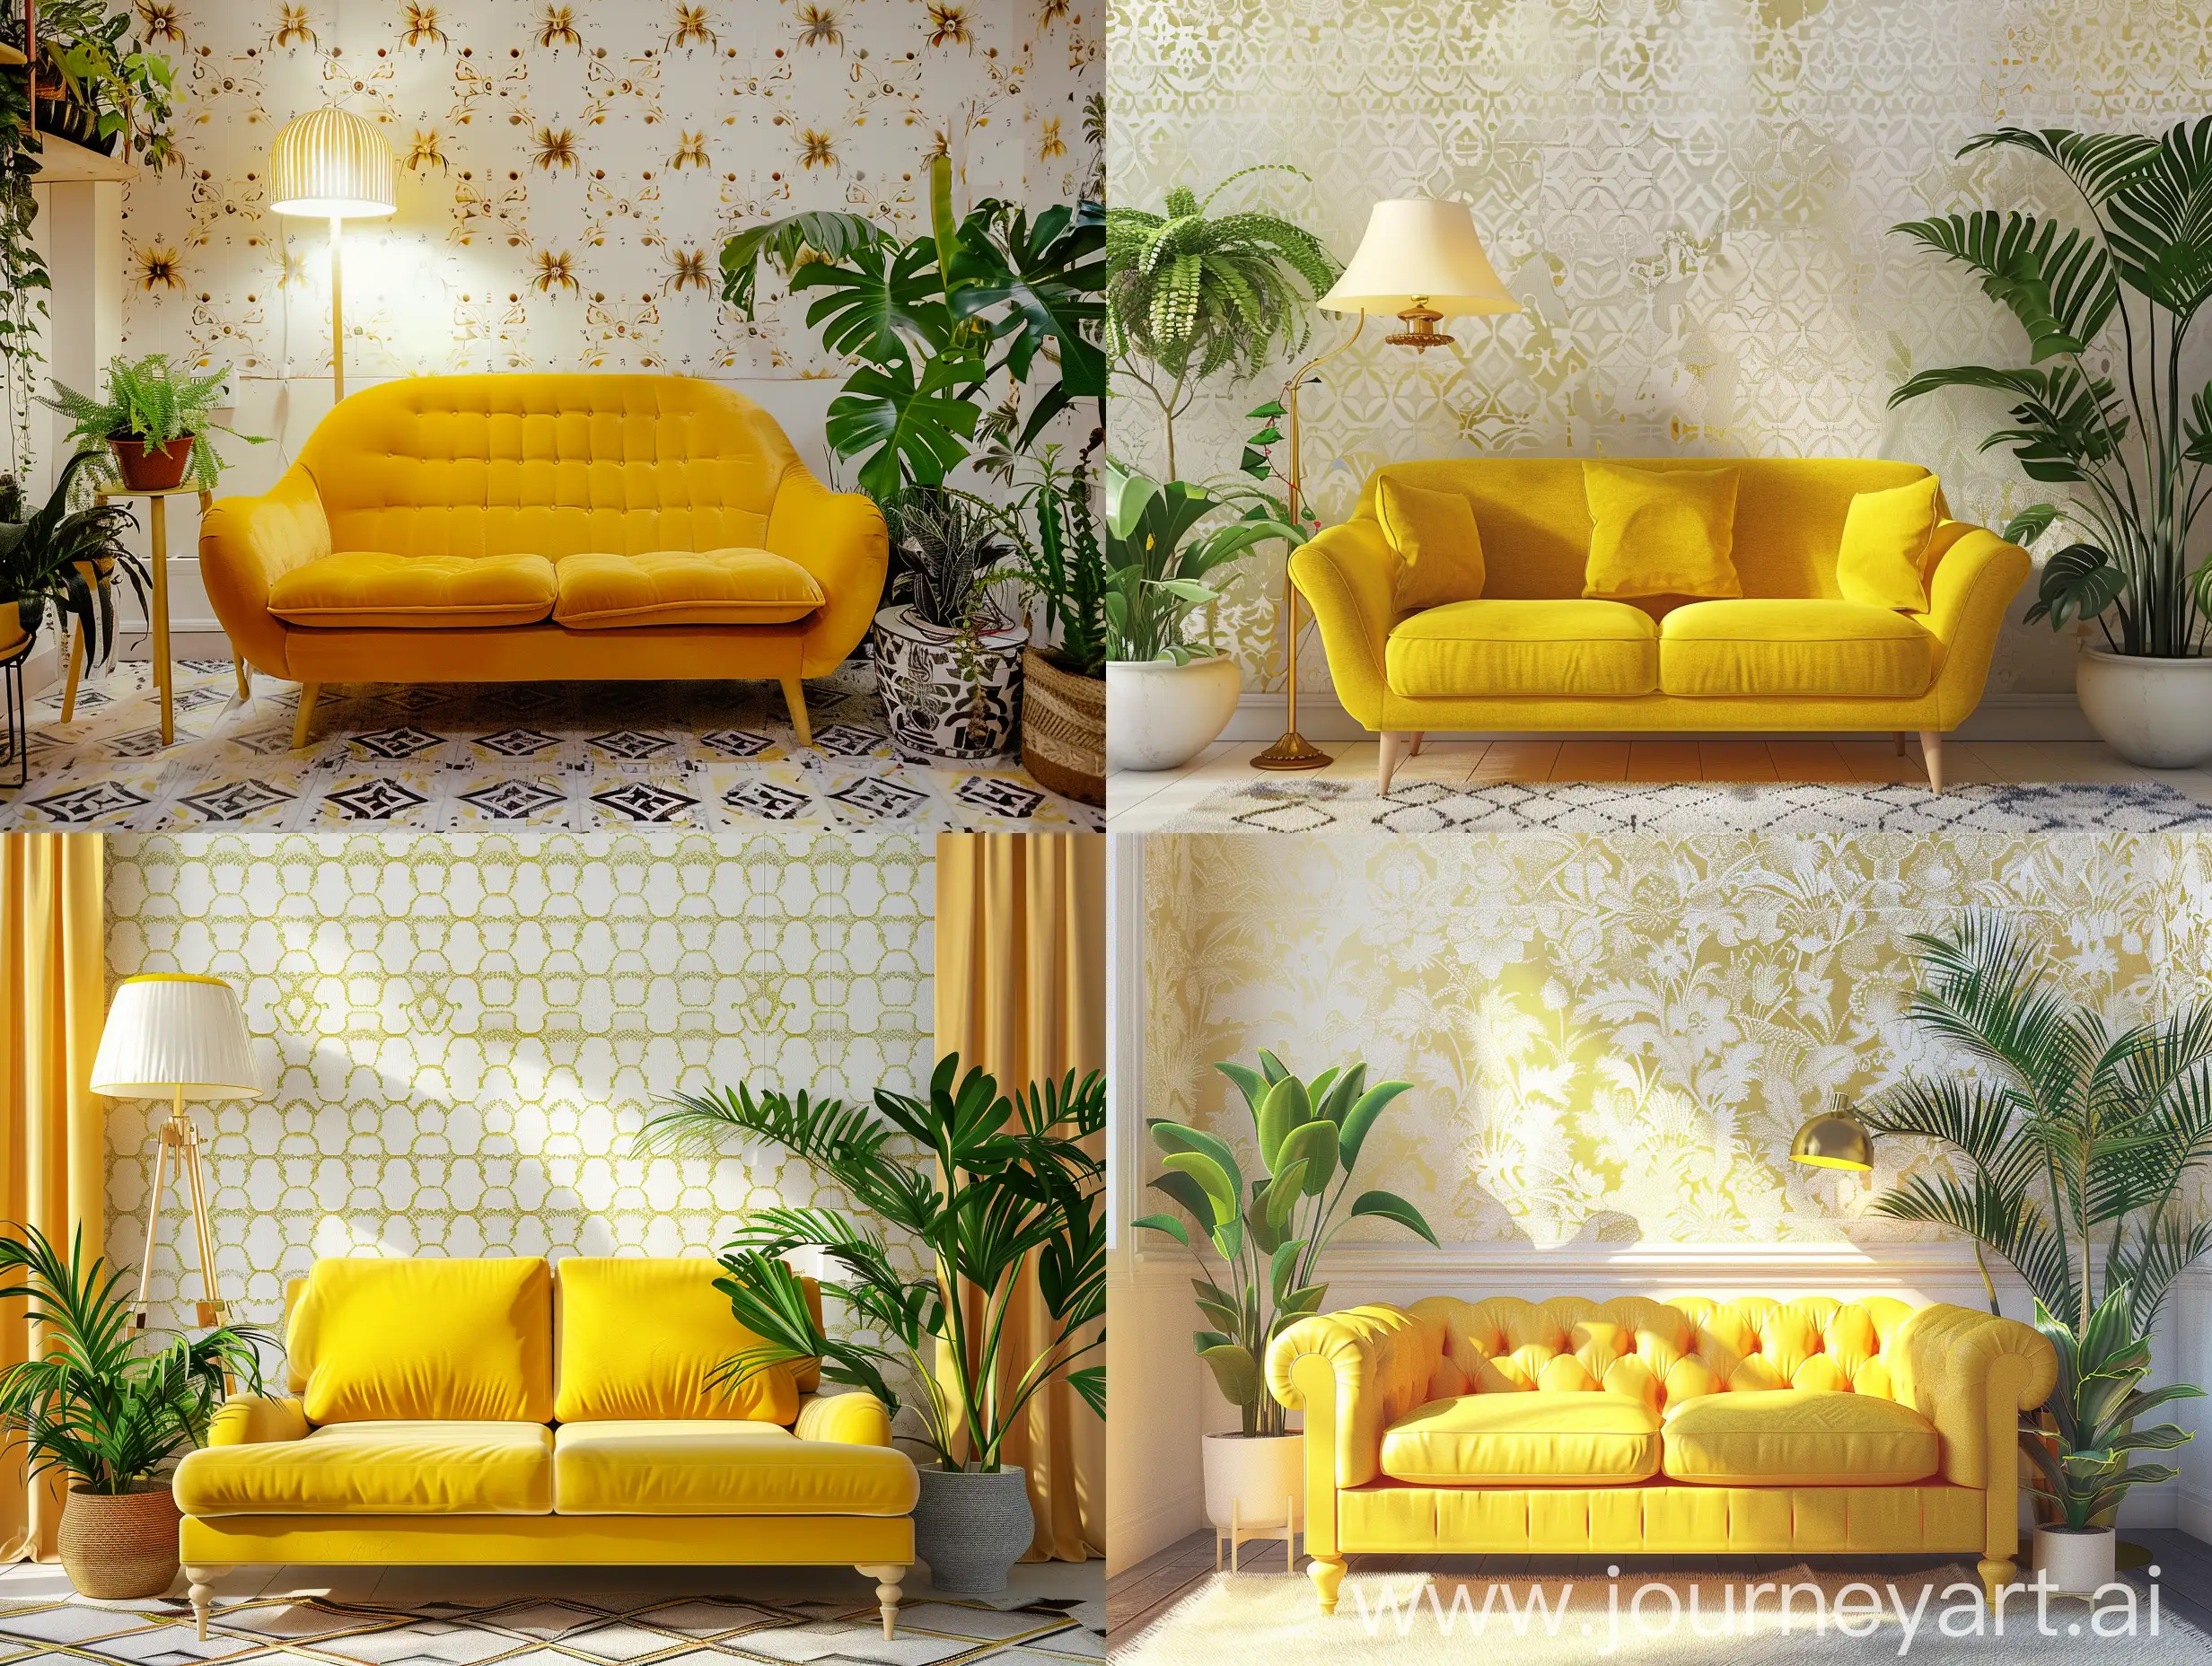 Vibrant-Living-Room-with-Yellow-Sofa-Plants-and-Lamp